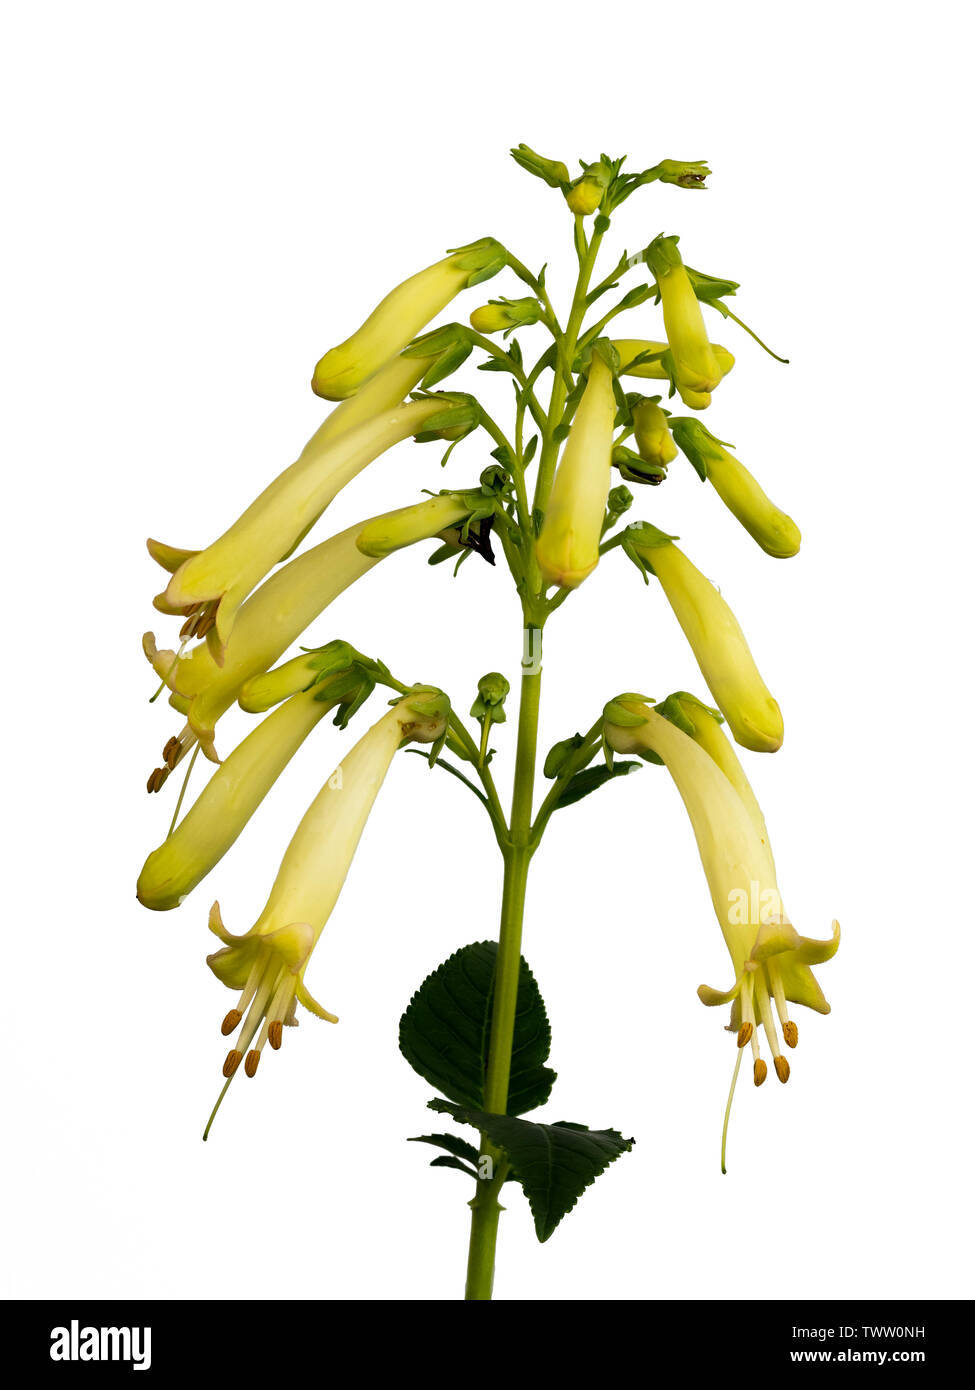 Pendant yellow tubular flowers of the hardy South African shrub, Phygelius aequalis 'Yellow Trumpet', on a white background Stock Photo